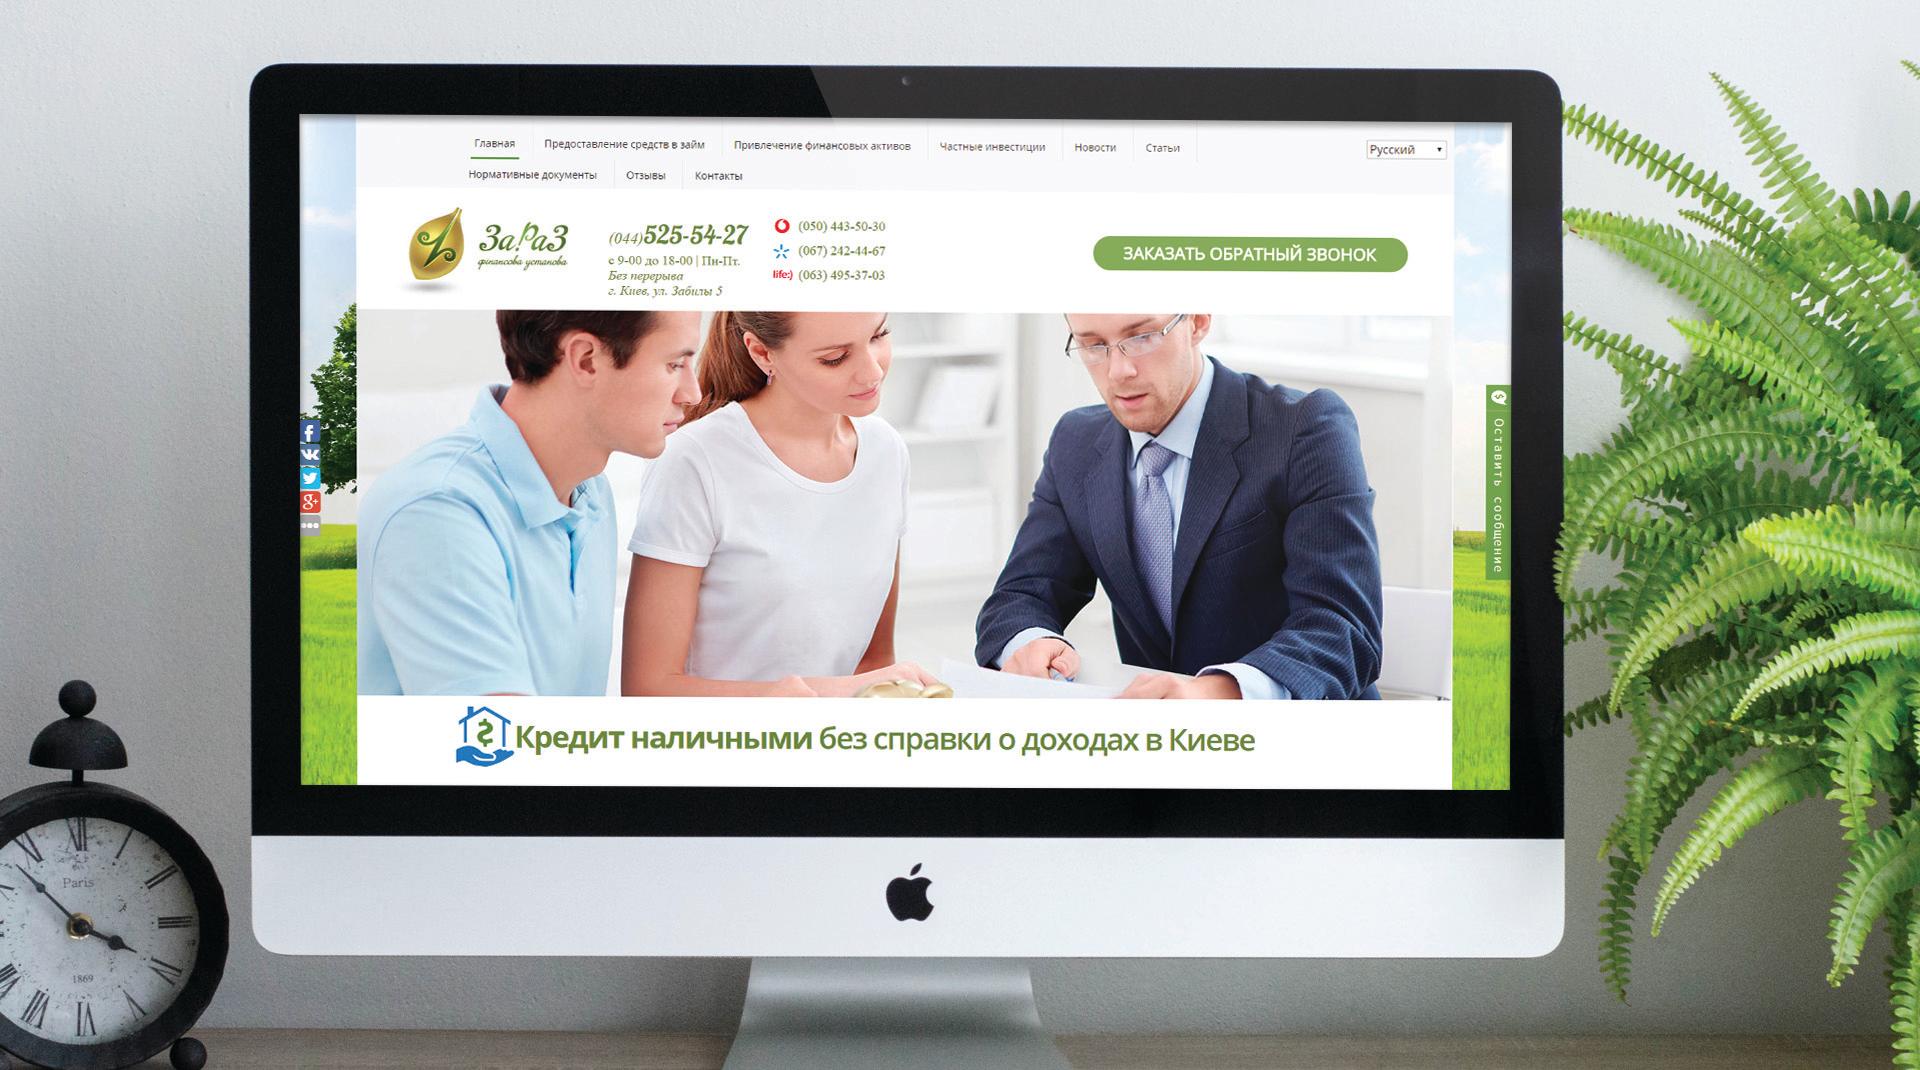 Creating of the website for a financial company